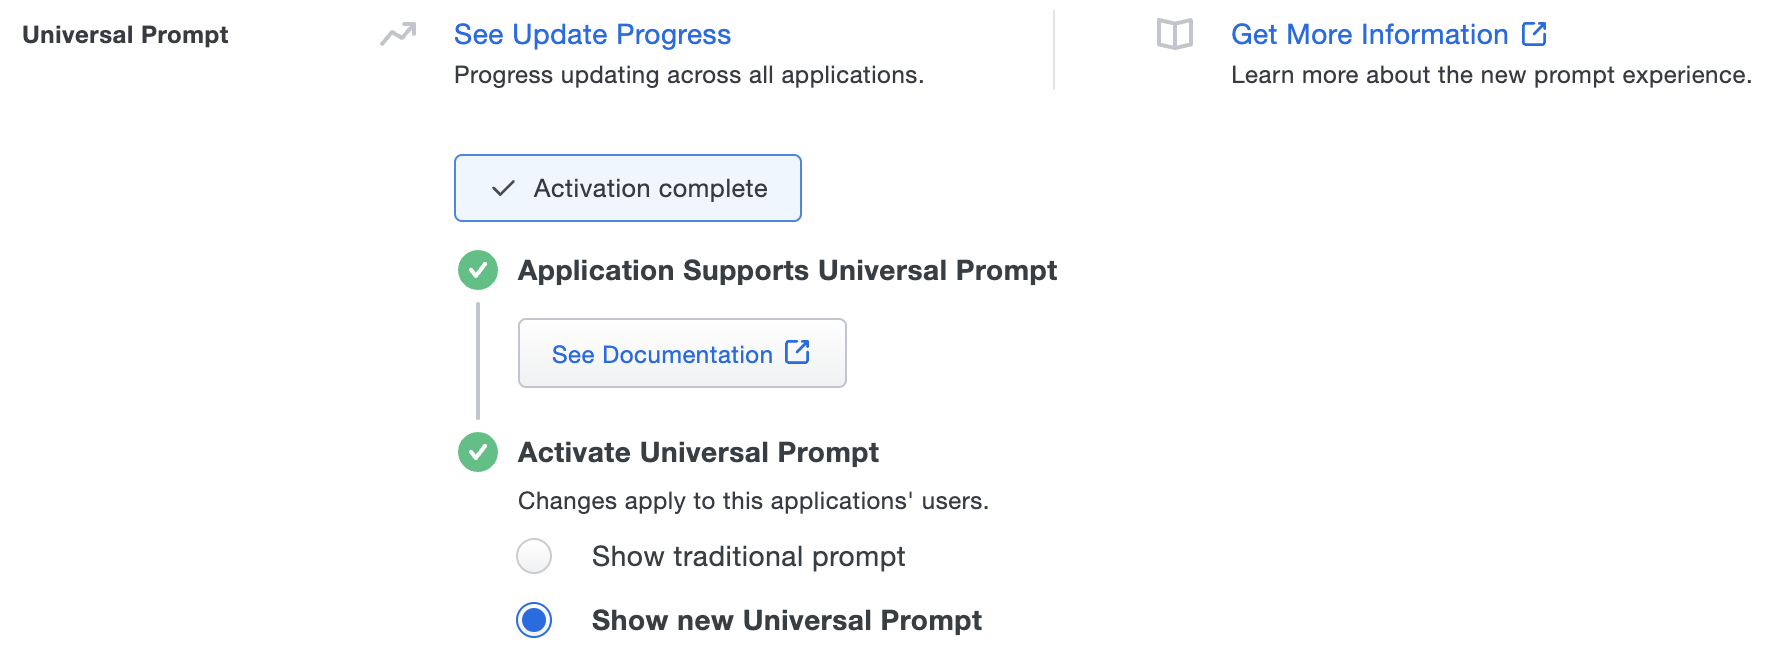 Universal Prompt Info - Universal Prompt Activation Complete